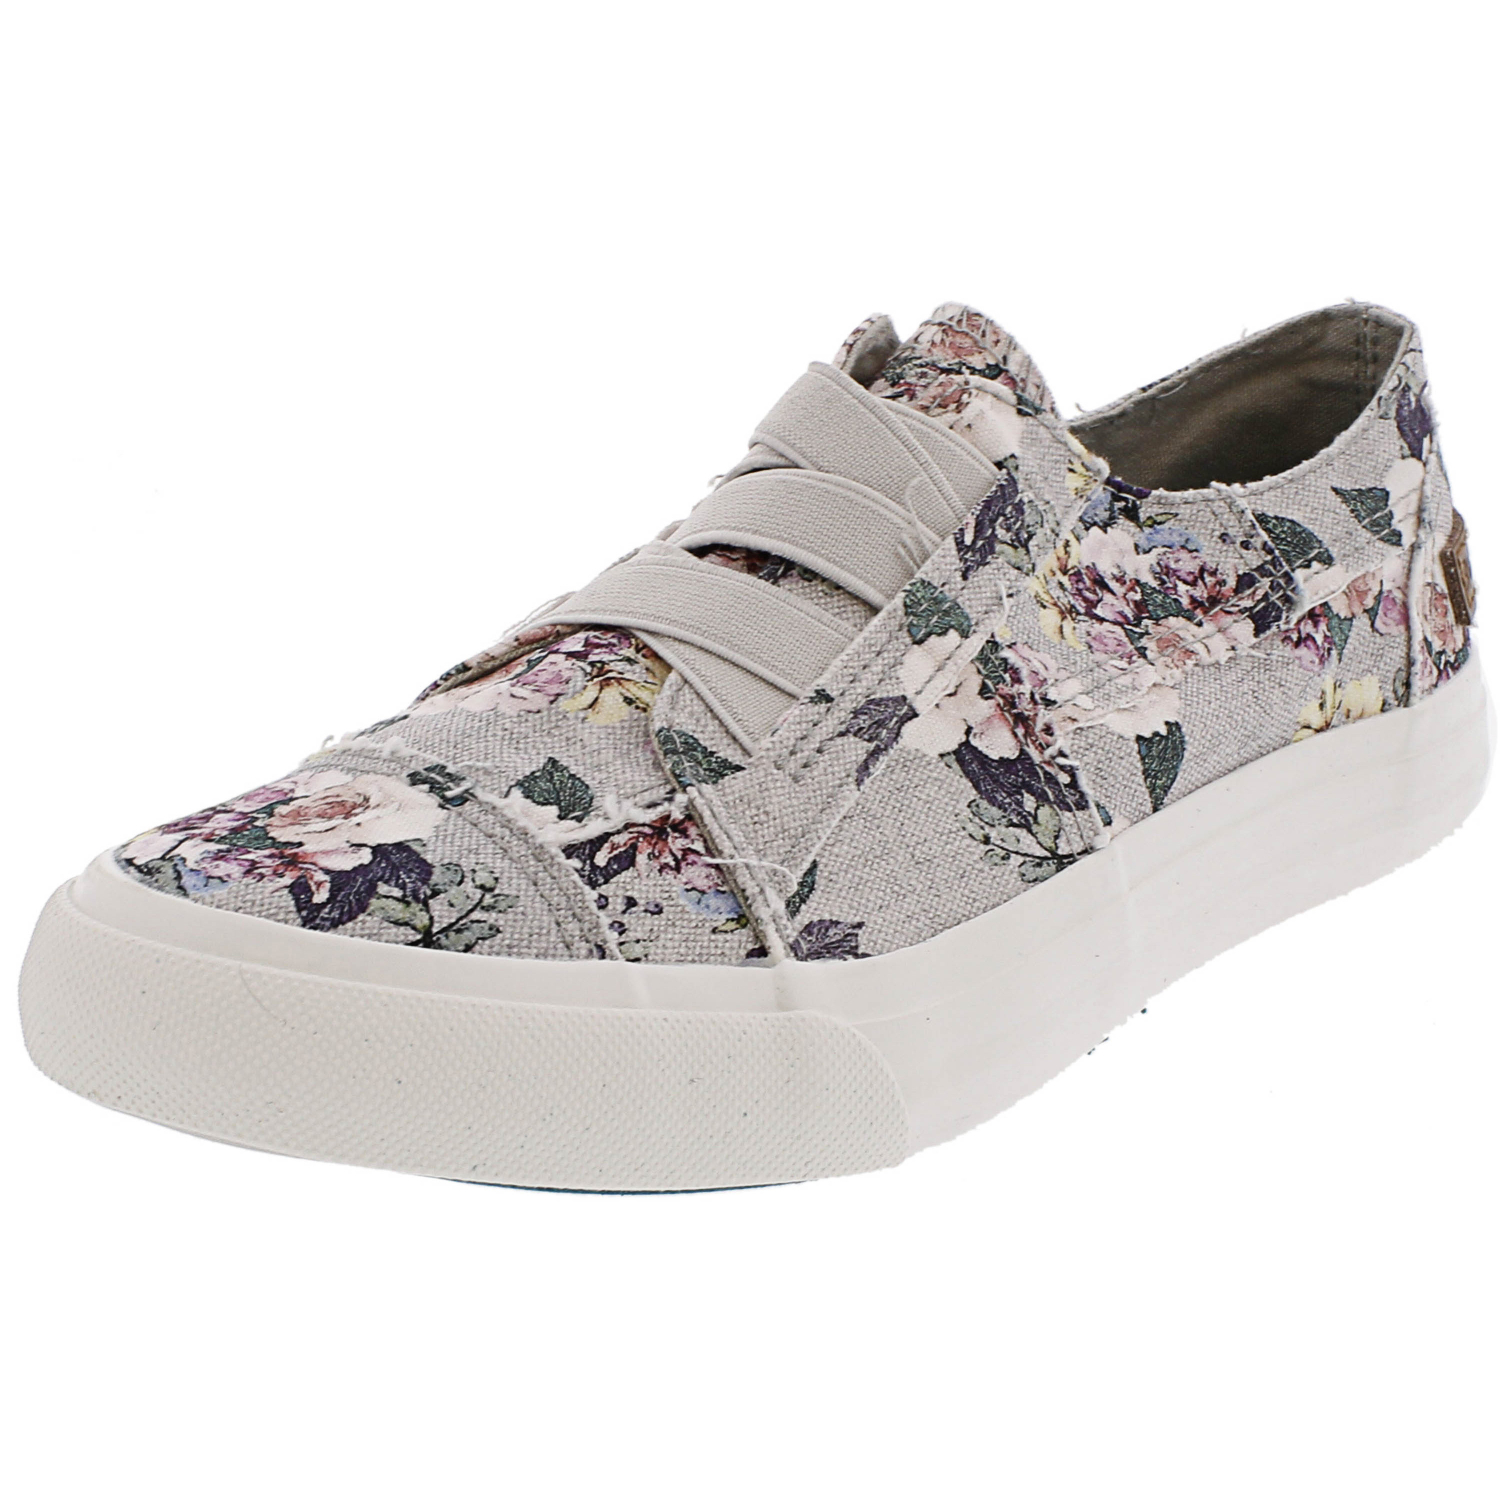 Blowfish Women's Marley Print Canvas Ankle-High Fabric Slip-On Shoes | eBay